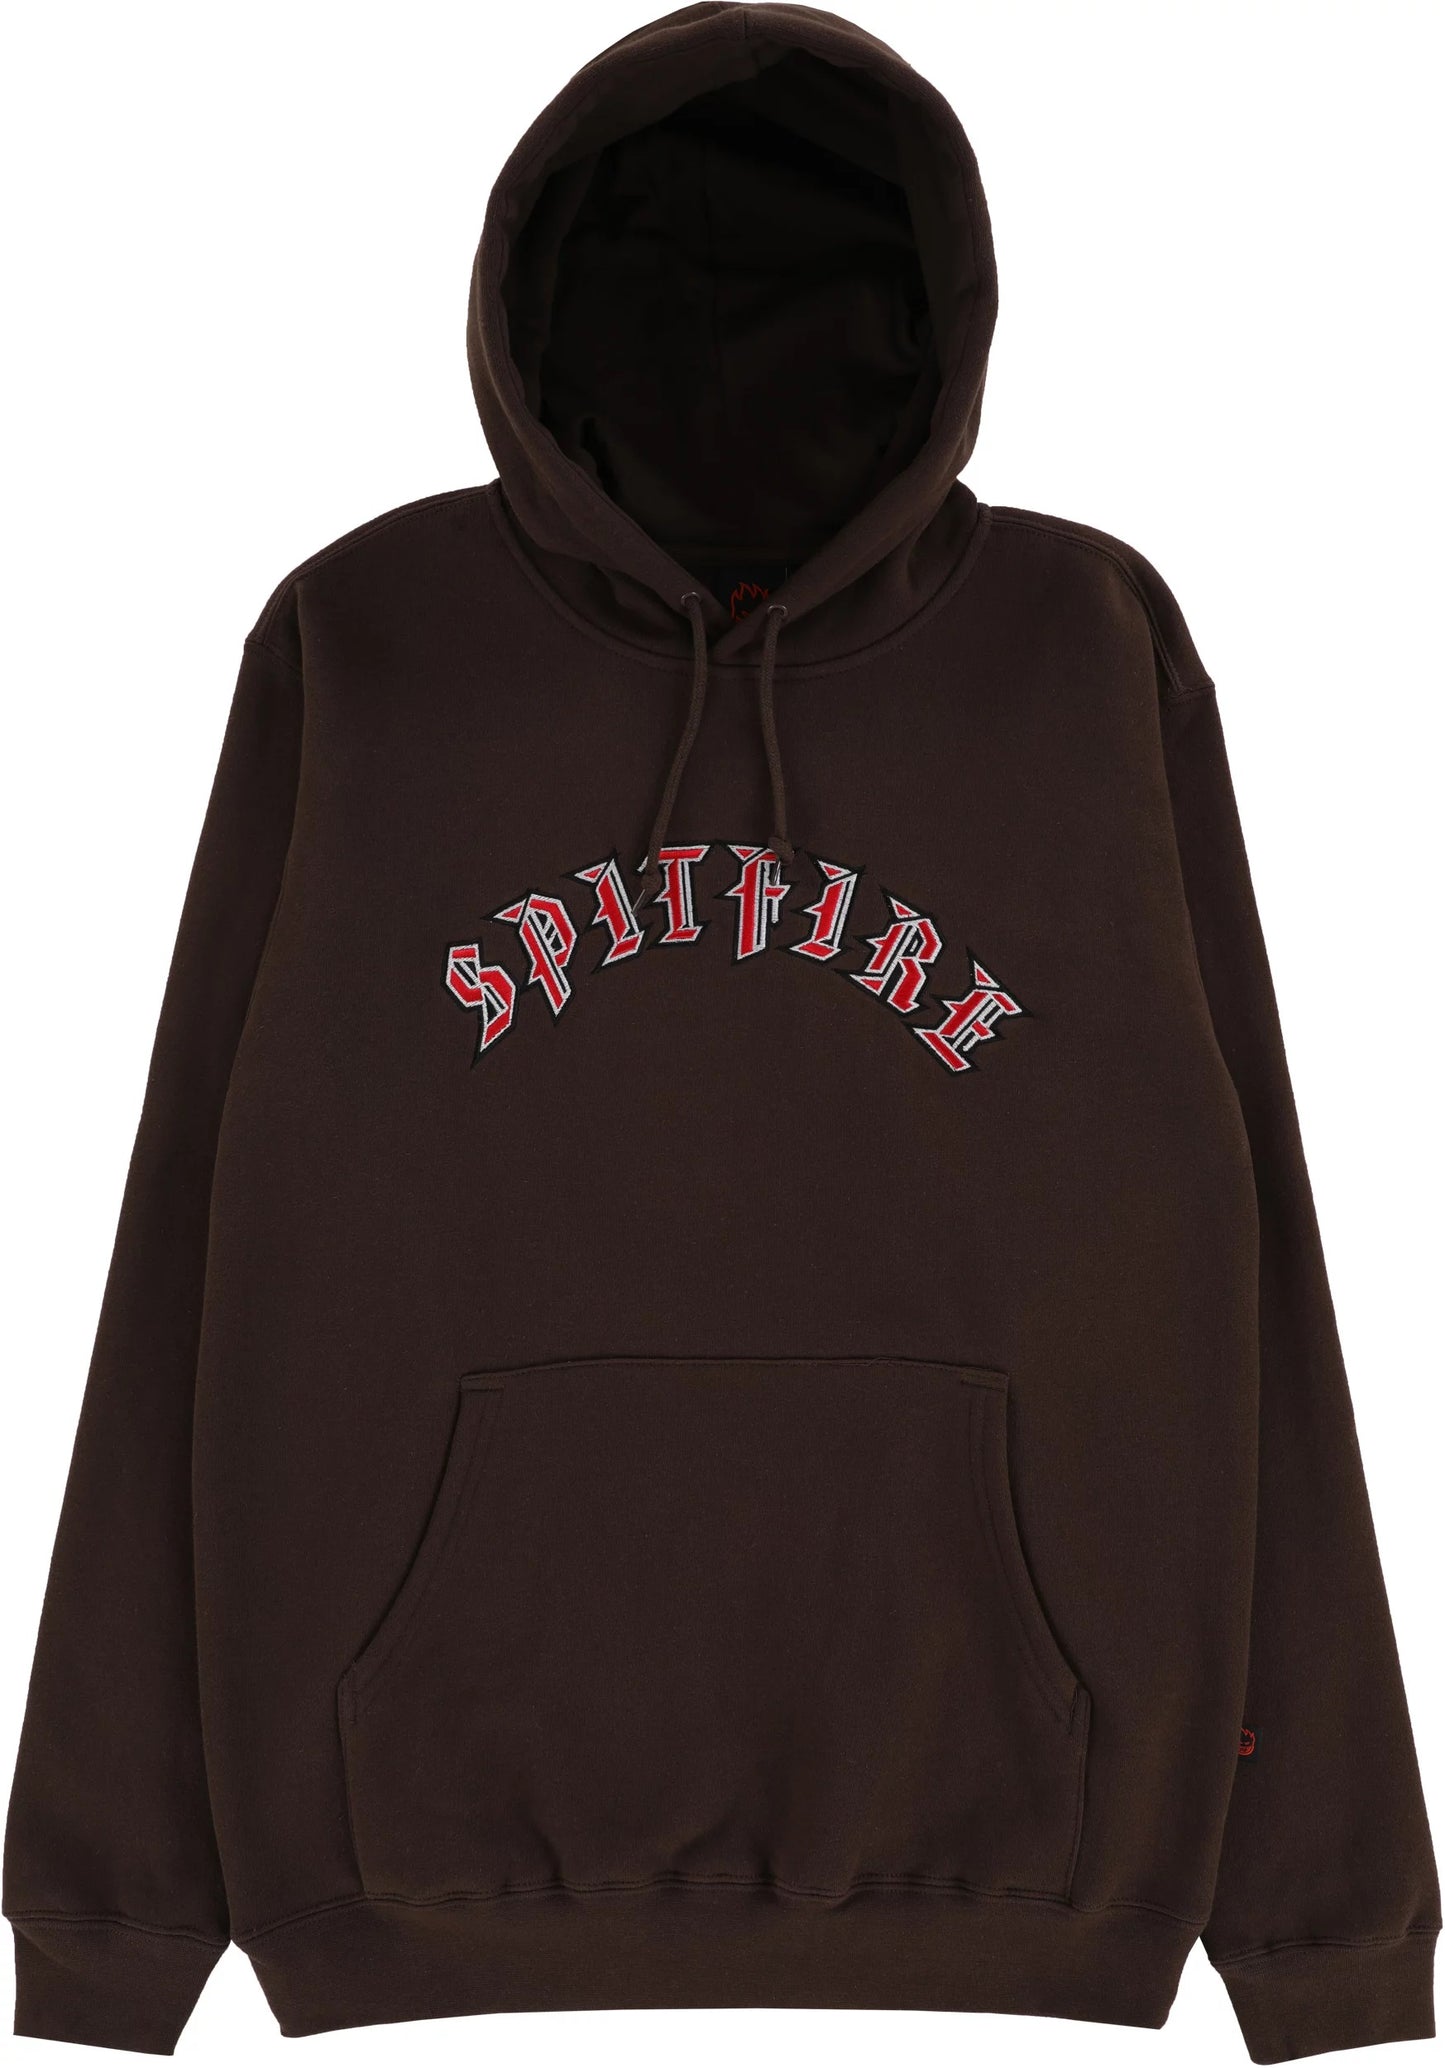 Spitfire Old E EMB Brown Hoodie